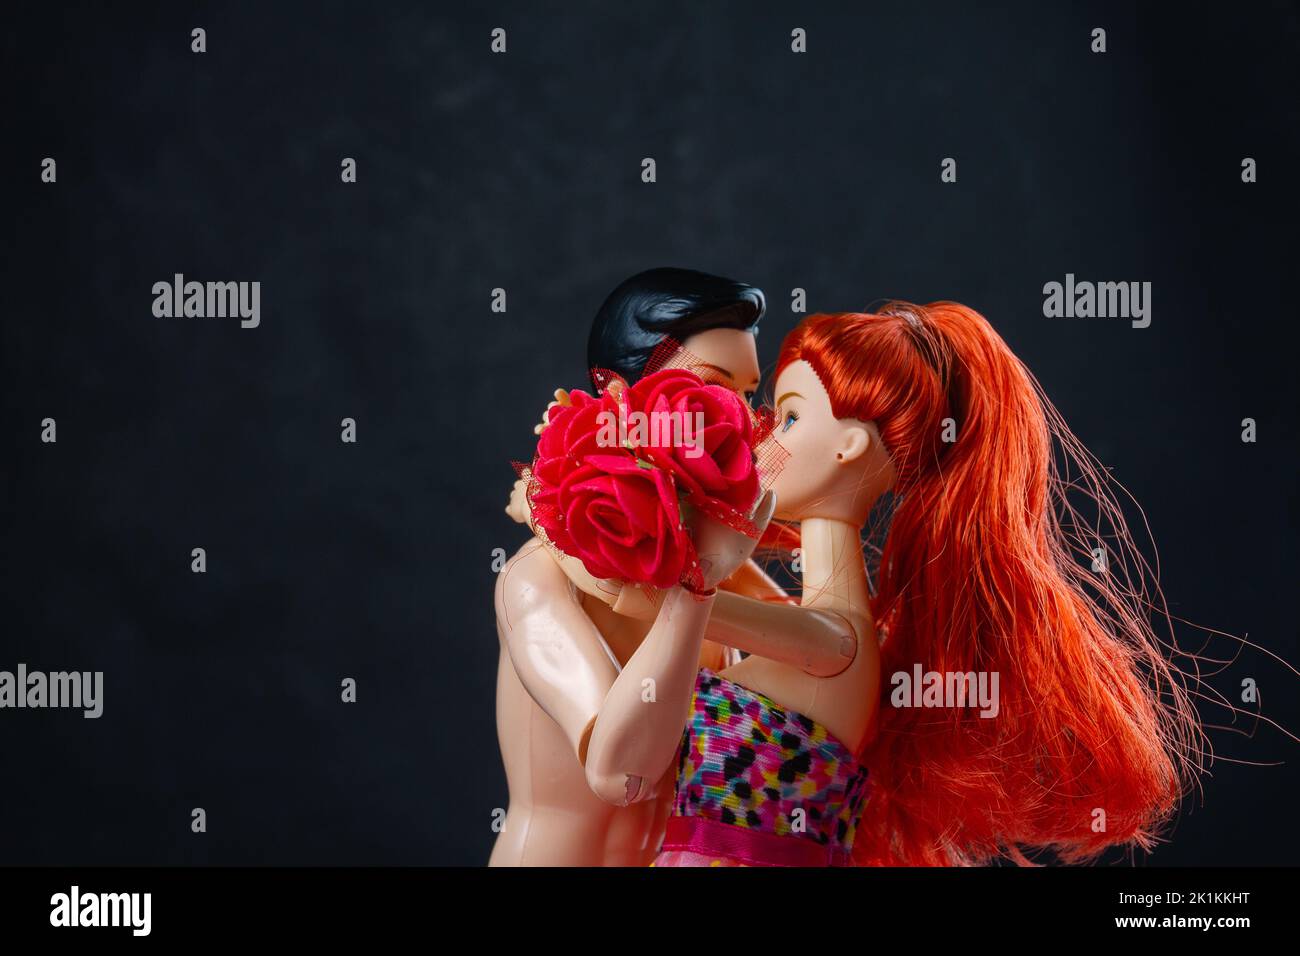 Kissing man and woman doll with red flowers. Loving couple on black background. Stock Photo